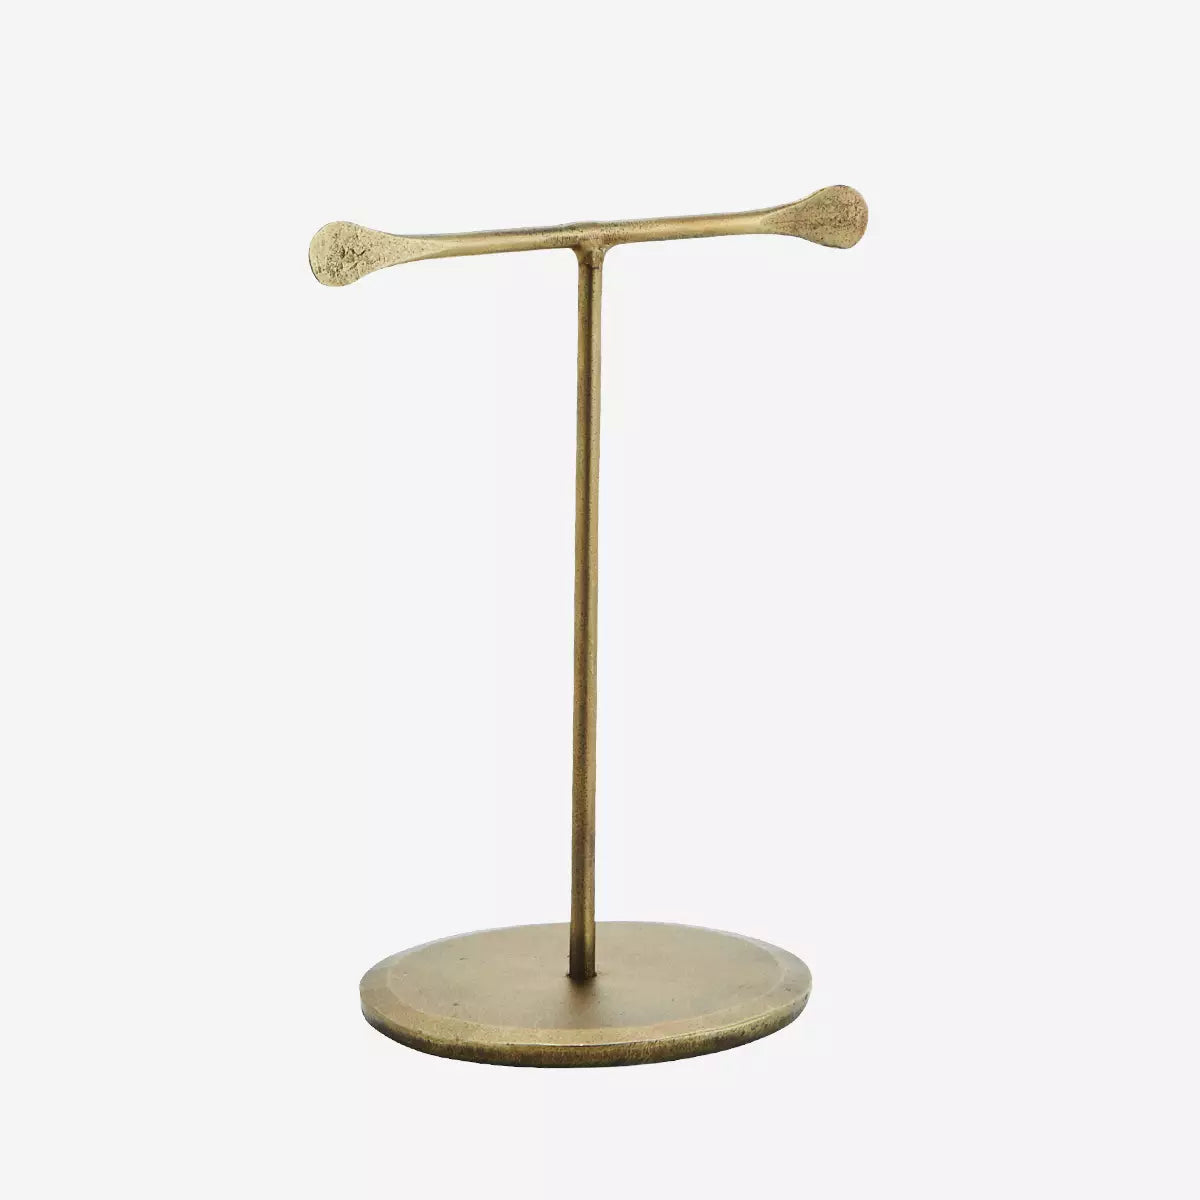 12.5cm Hand Forged Iron Jewellery Stand - Gold